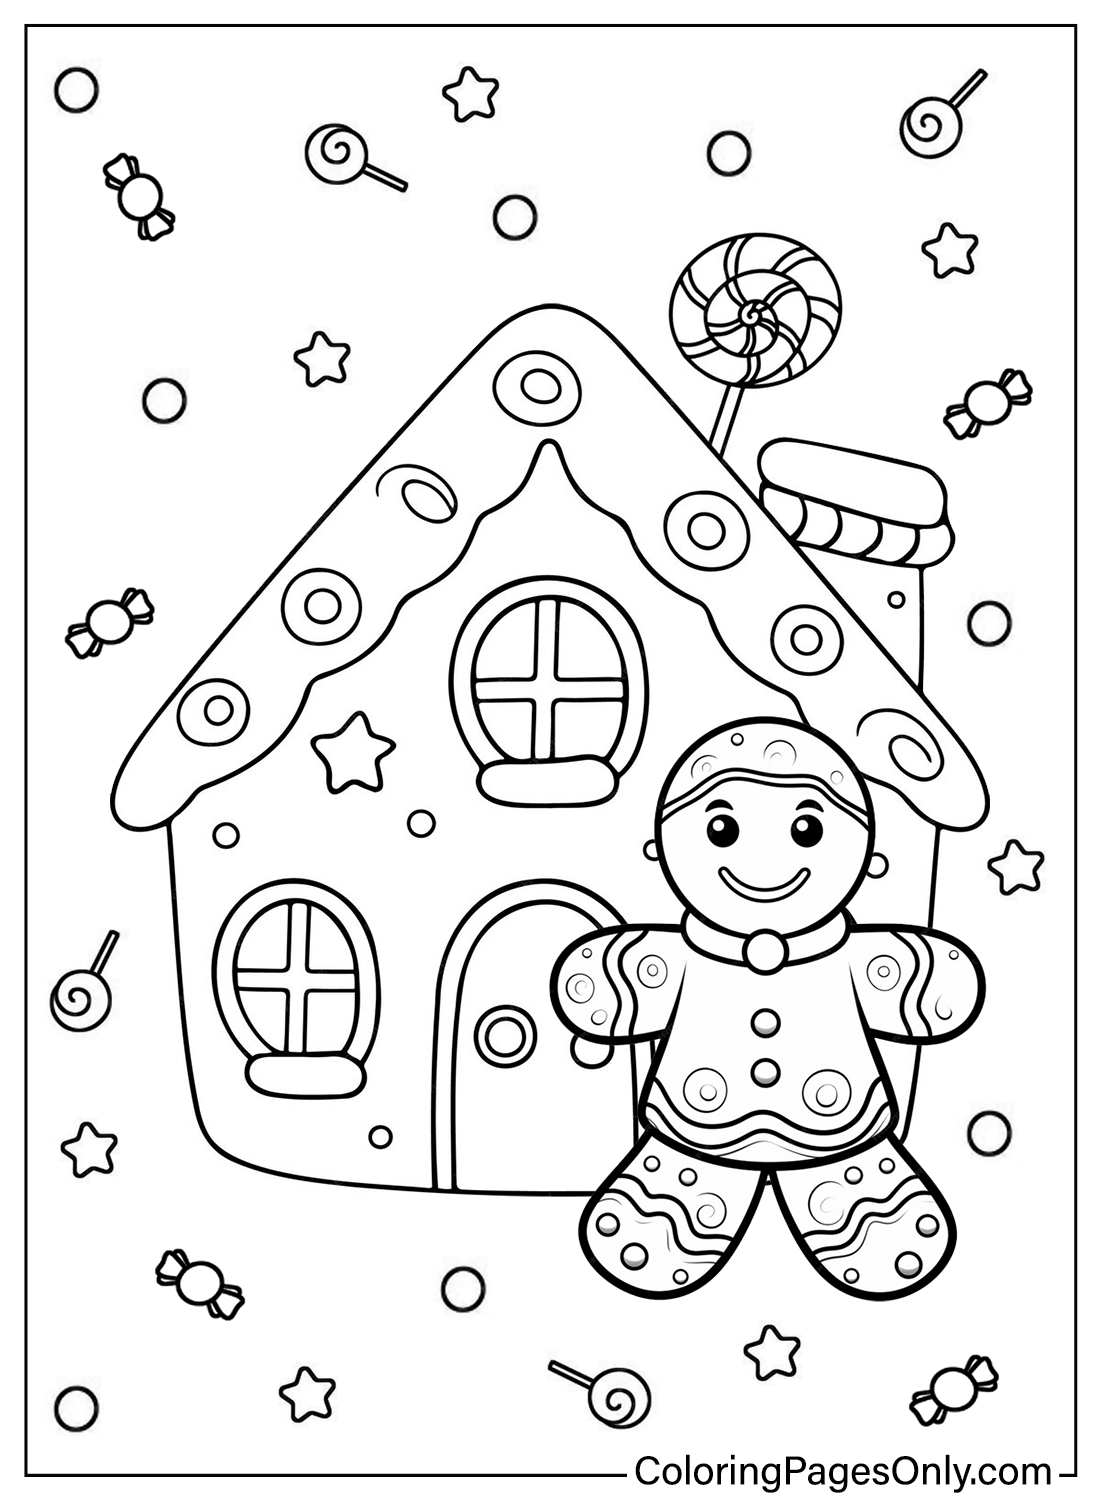 Gingerbread House and Gingerbread Man Coloring